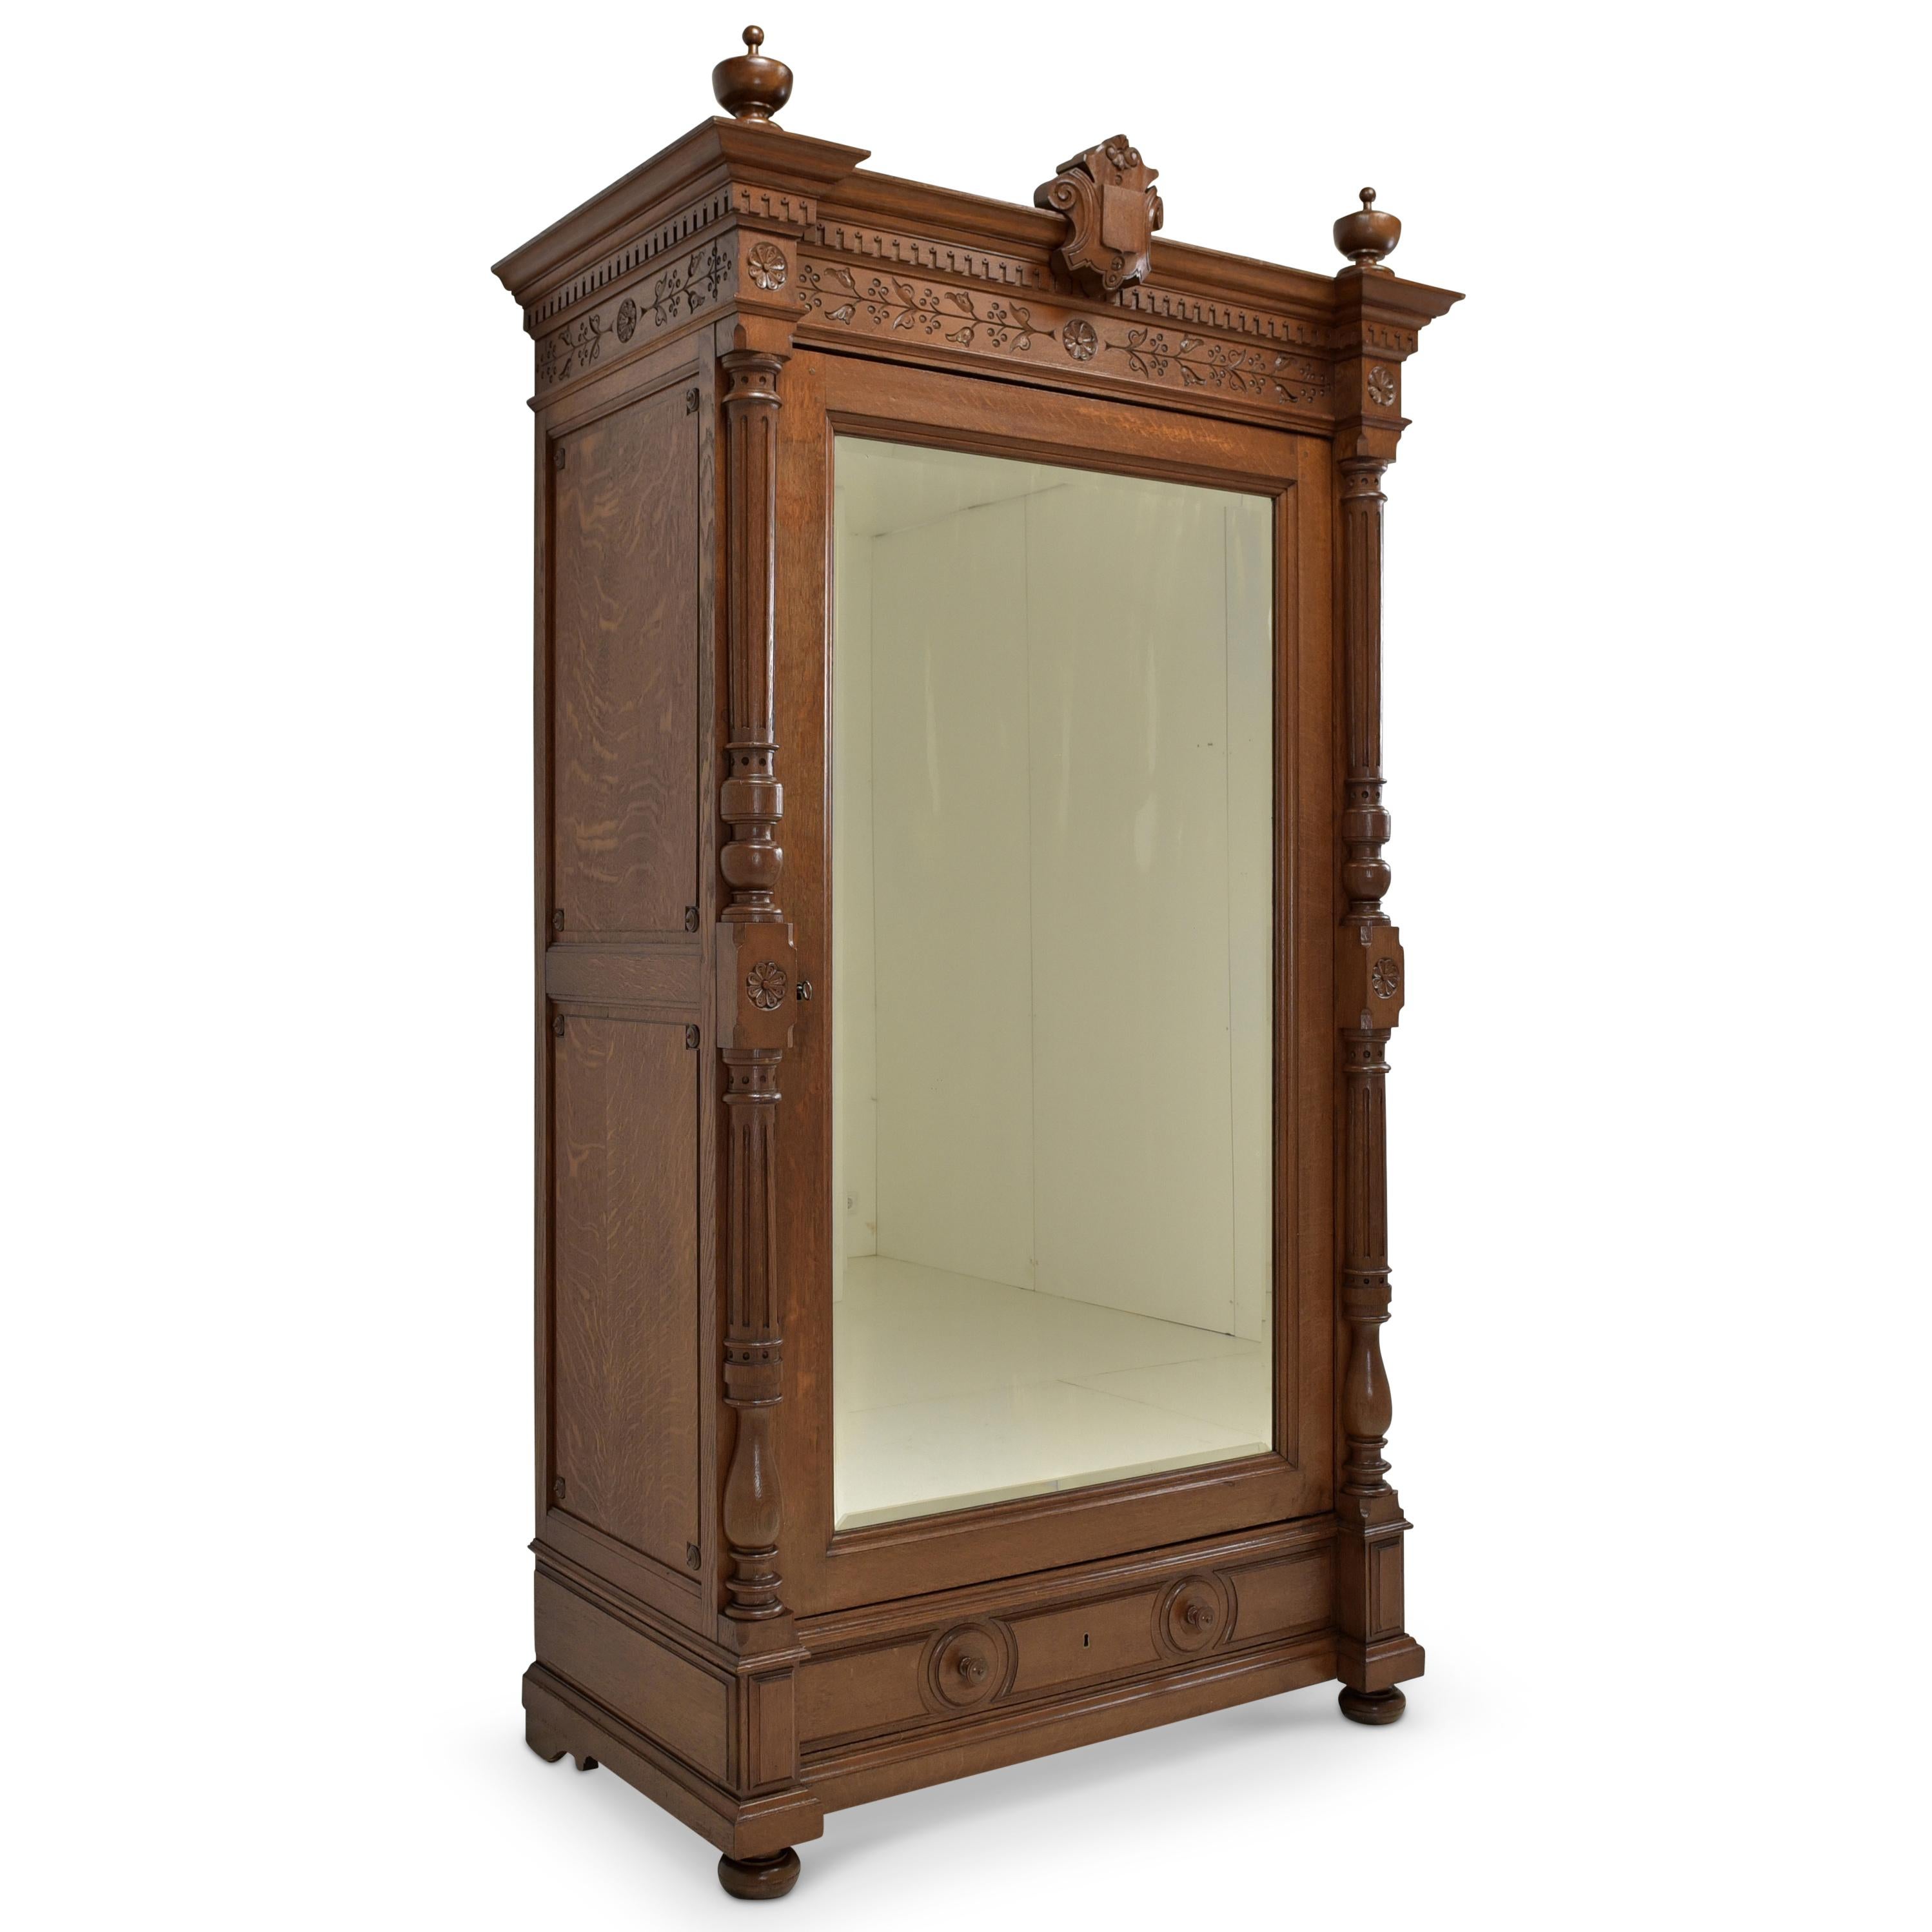 One-door hall closet restored Gründerzeit oak closet

Features:
Single-door model with mirror, clothes rail and drawer
Very high quality processing
Heavy quality
Cassette fillings
Superior full columns
Drawer pronged
Original faceted